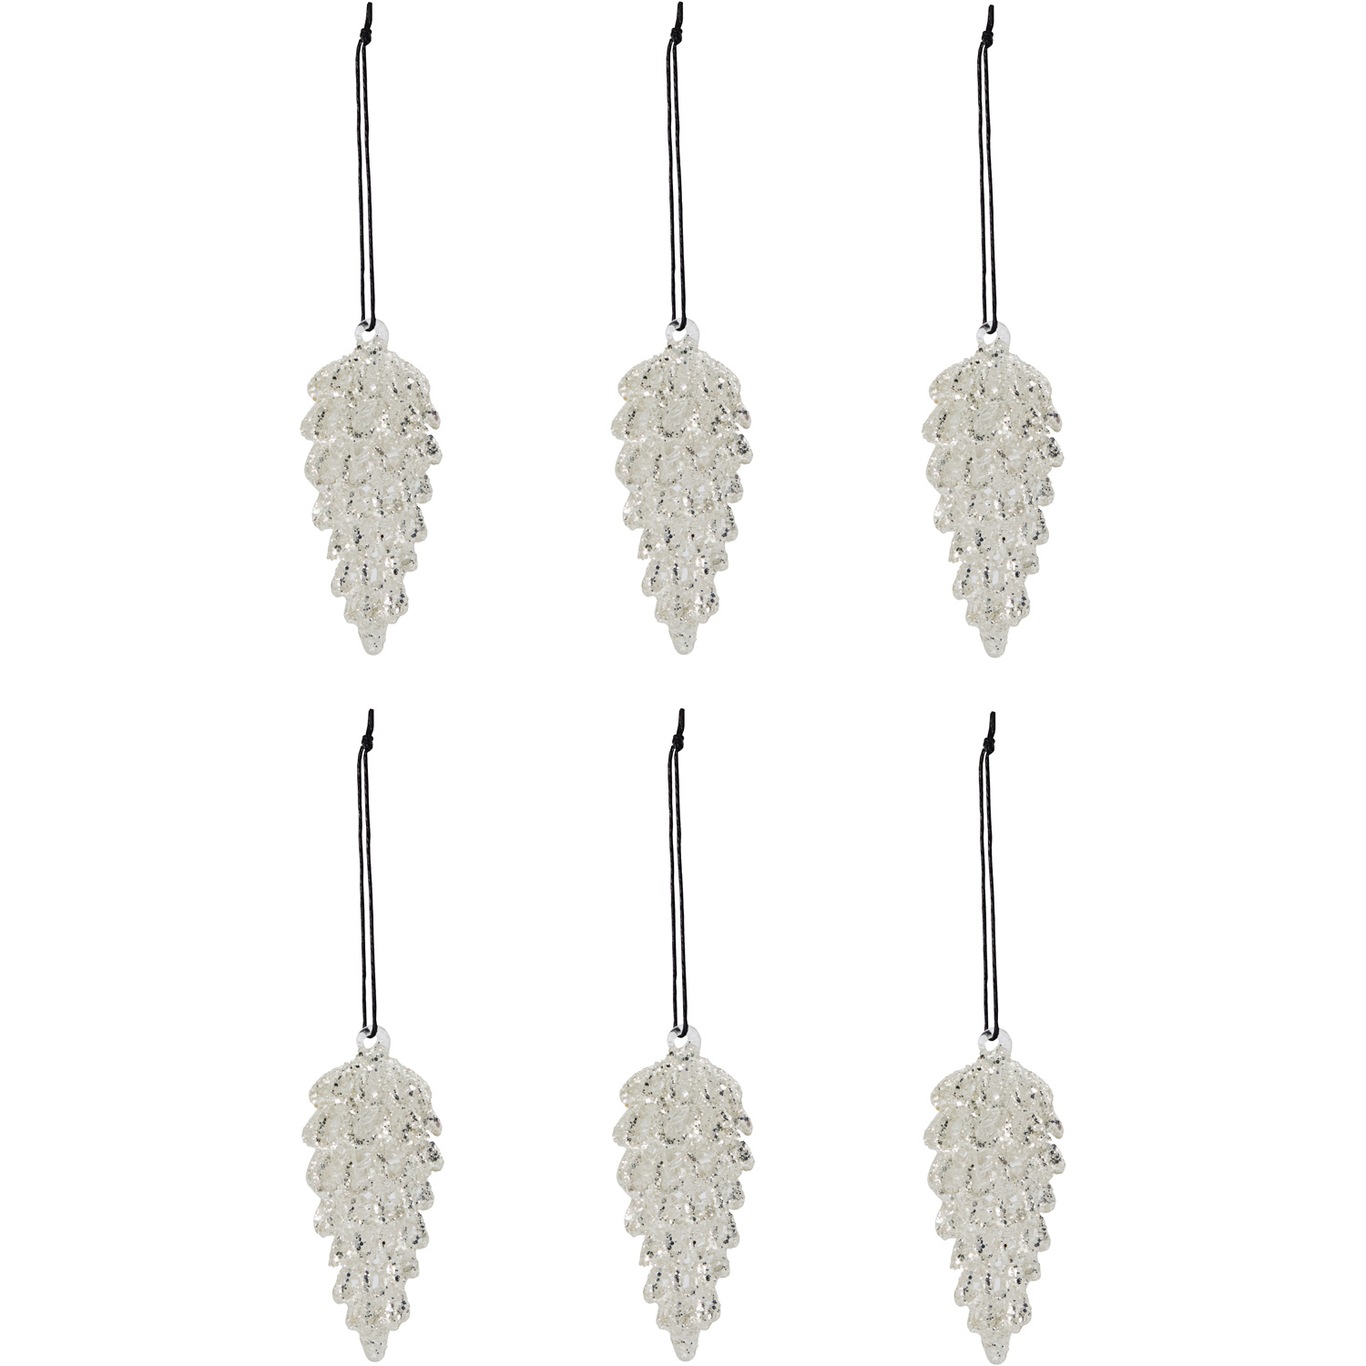 Cone Christmas Decorations 6-pack 3,5x9 cm, Silver